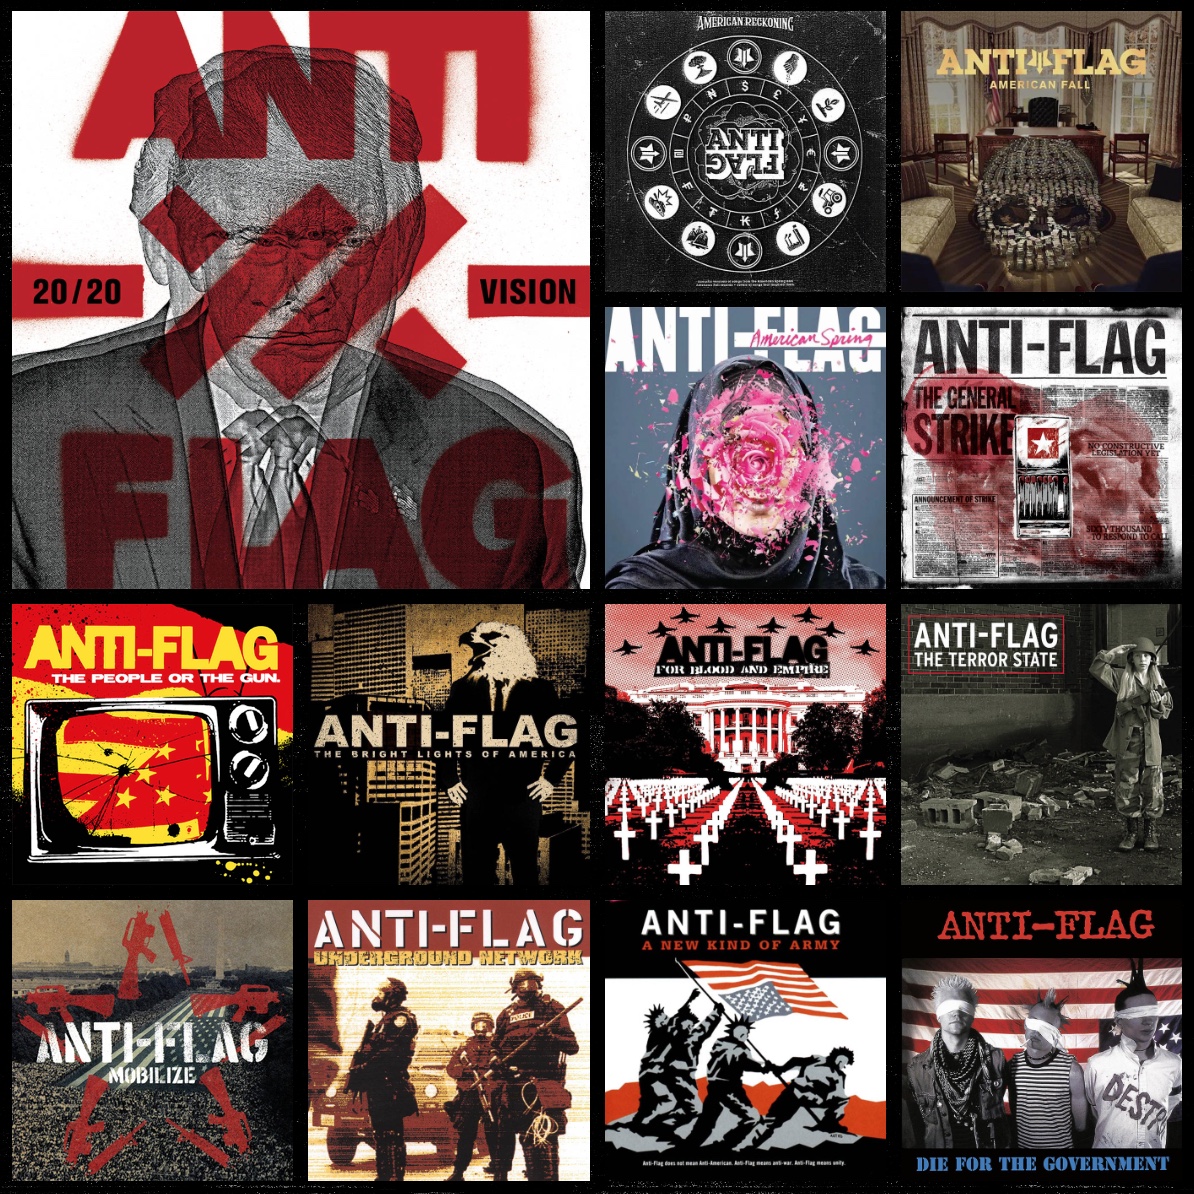 Anti-Flag records from 1996 to 2020